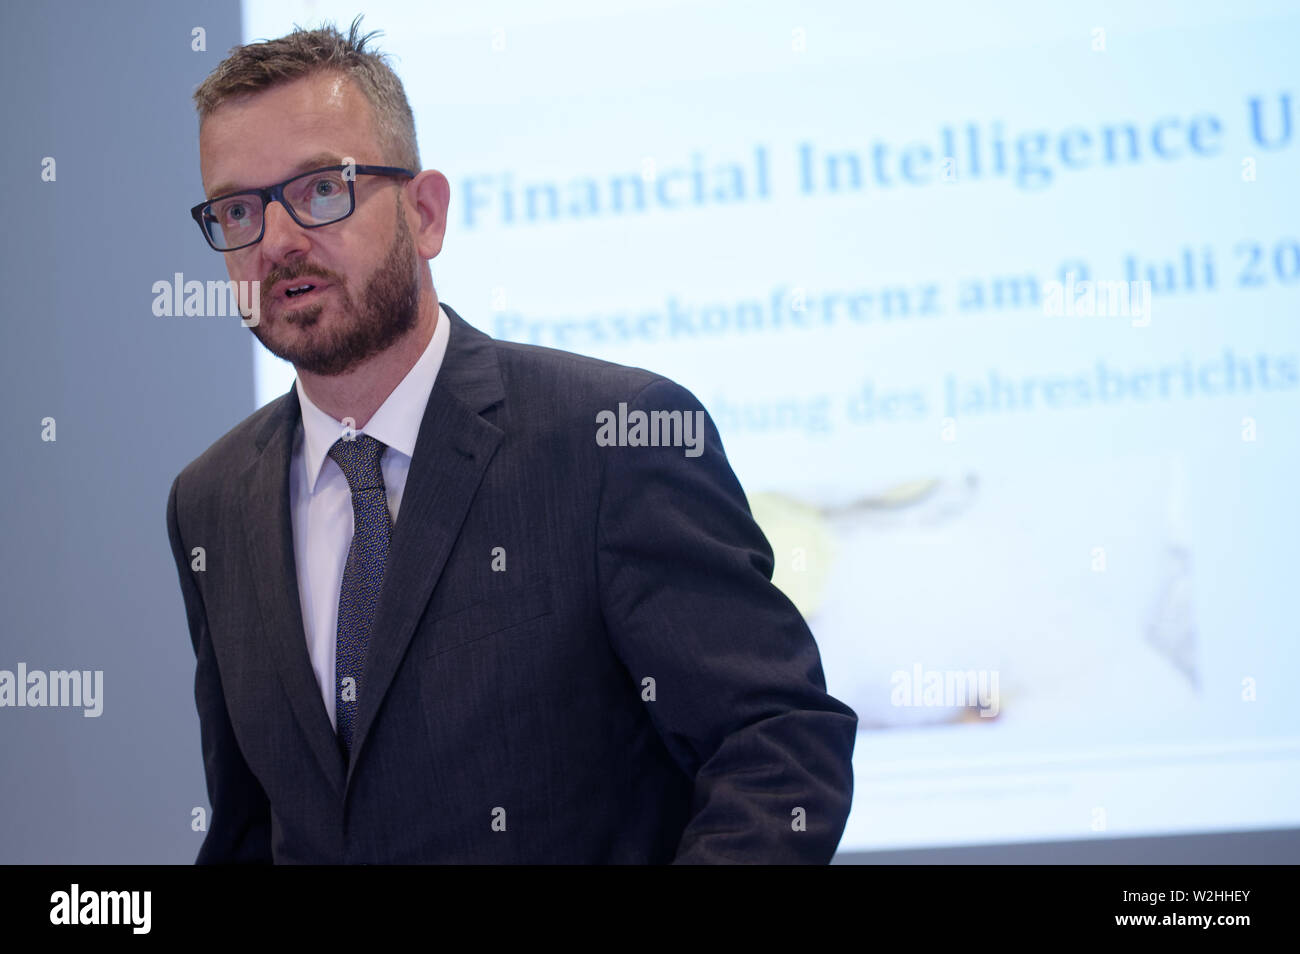 Cologne, Germany. 09th July, 2019. The head of the FIU, Christof Schulte, speaks at a press conference on the annual report of the Financial Intelligence Unit (FIU). The FIU is the federal anti-money laundering unit. Credit: Henning Kaiser/dpa/Alamy Live News Stock Photo